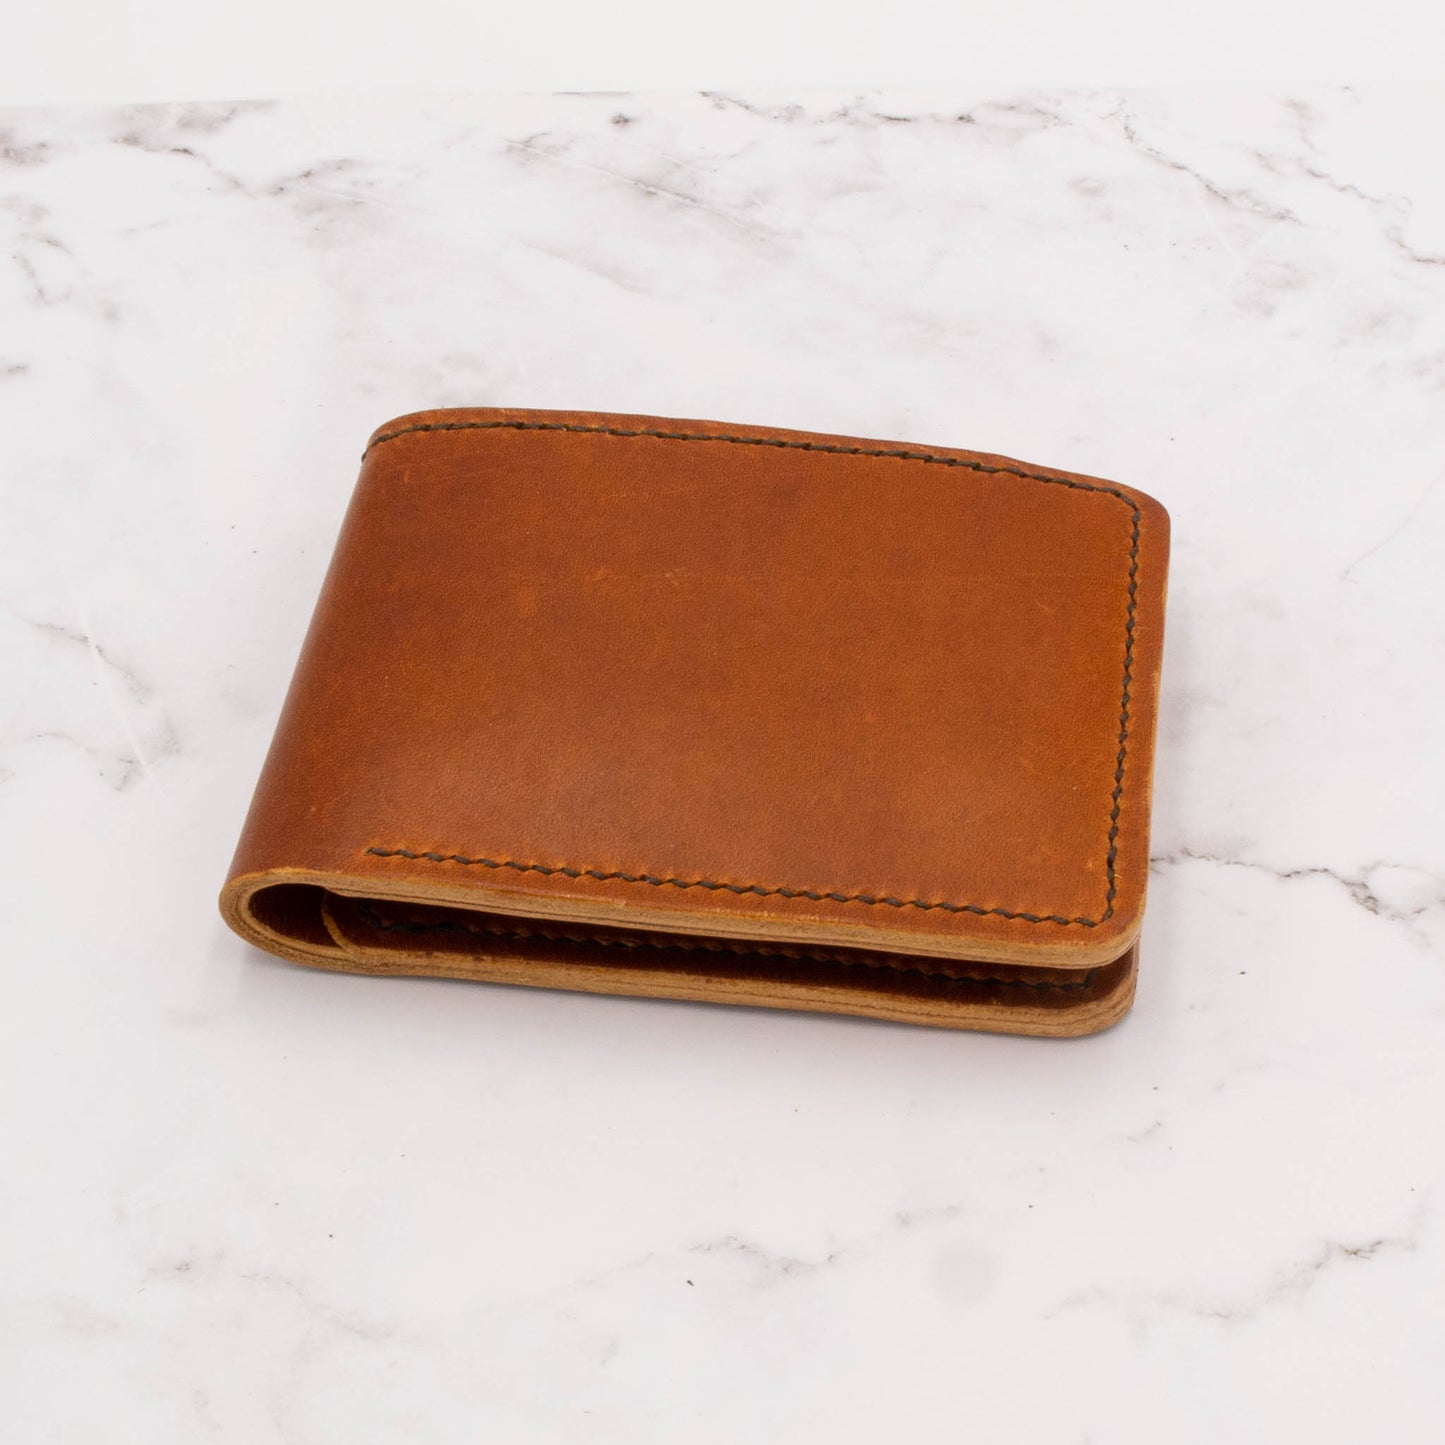 Handcrafted Leather Bifold Wallet, 6 Card Slots and Billfold - English Tan